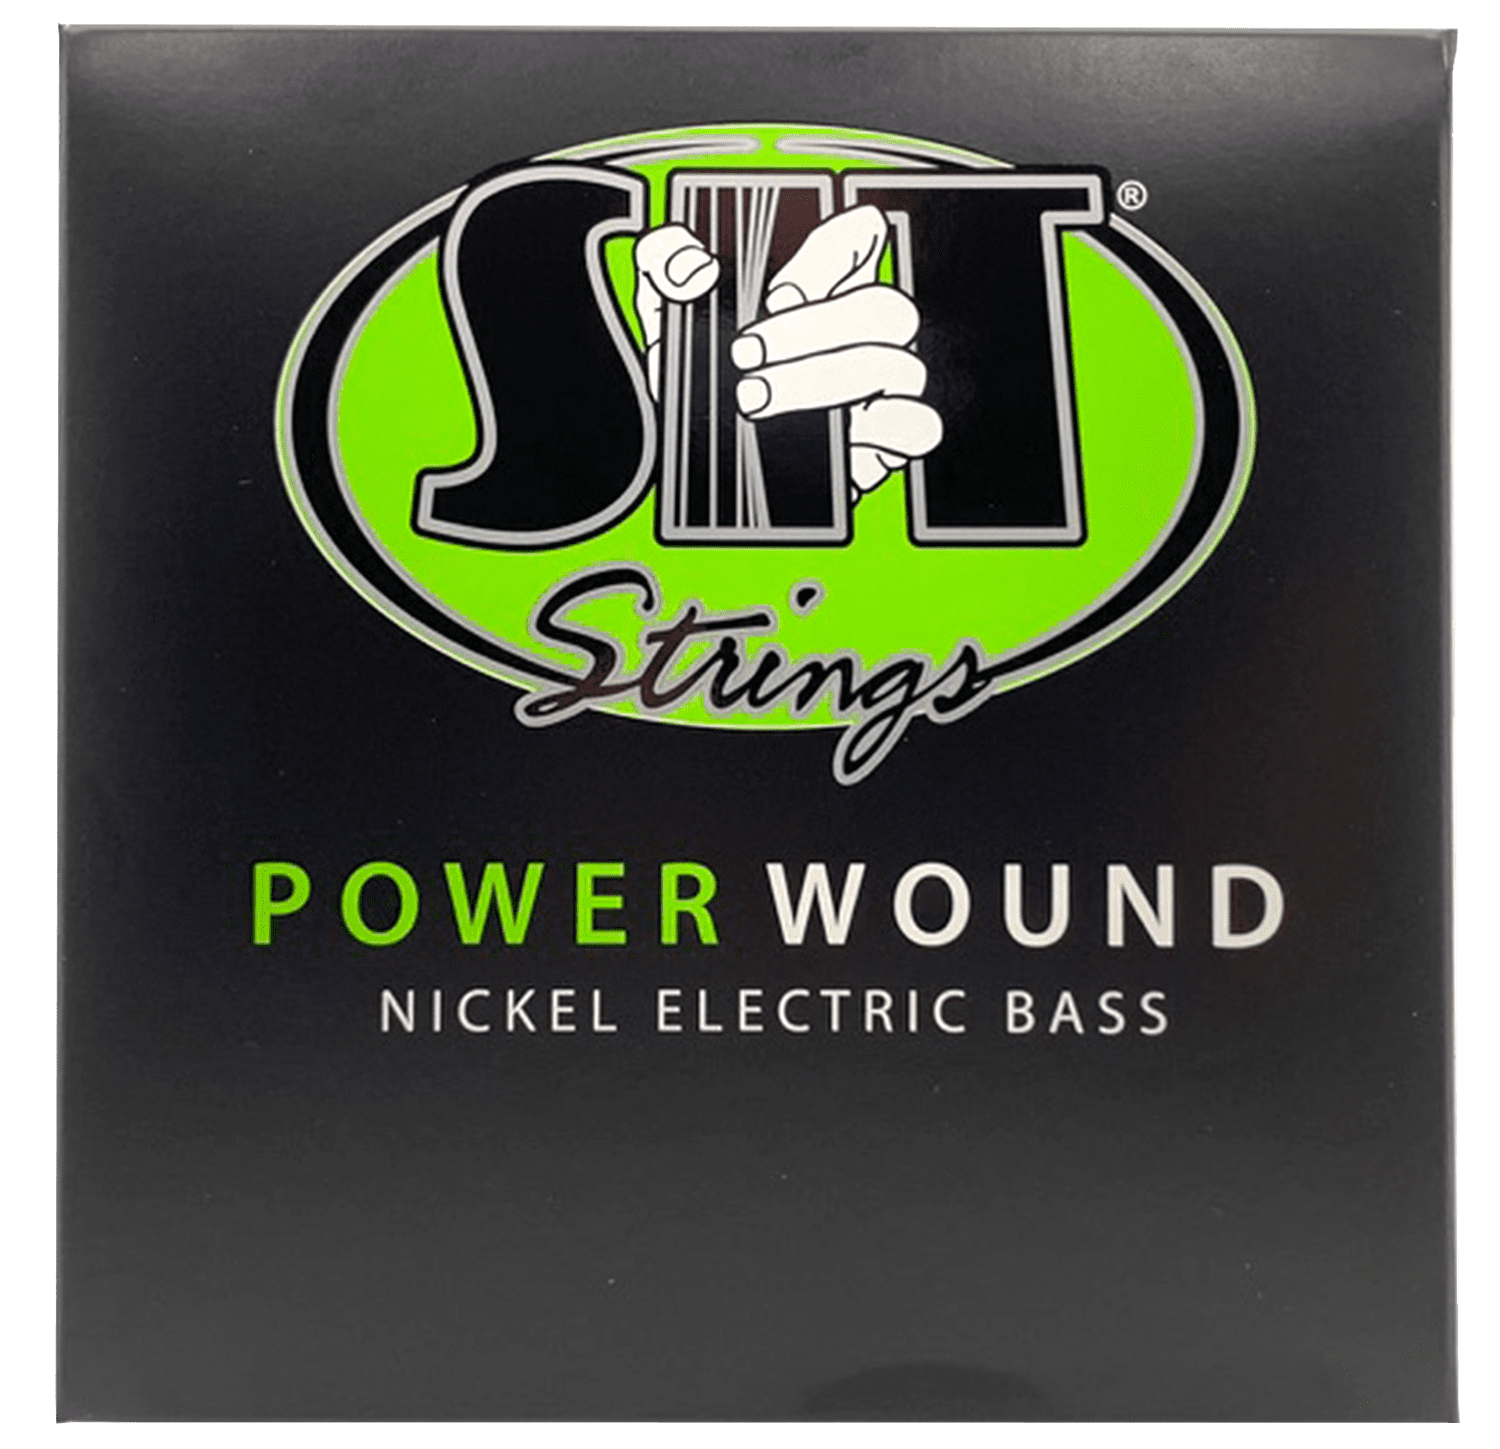 SIT ELECTRIC BASS STRINGS POWER WOUND NICKEL - HIENDGUITAR NR81890L 8-STRING OCTAVE 18-90 NR81890L 8-STRING OCTAVE 18-90 SIT Bass Strings